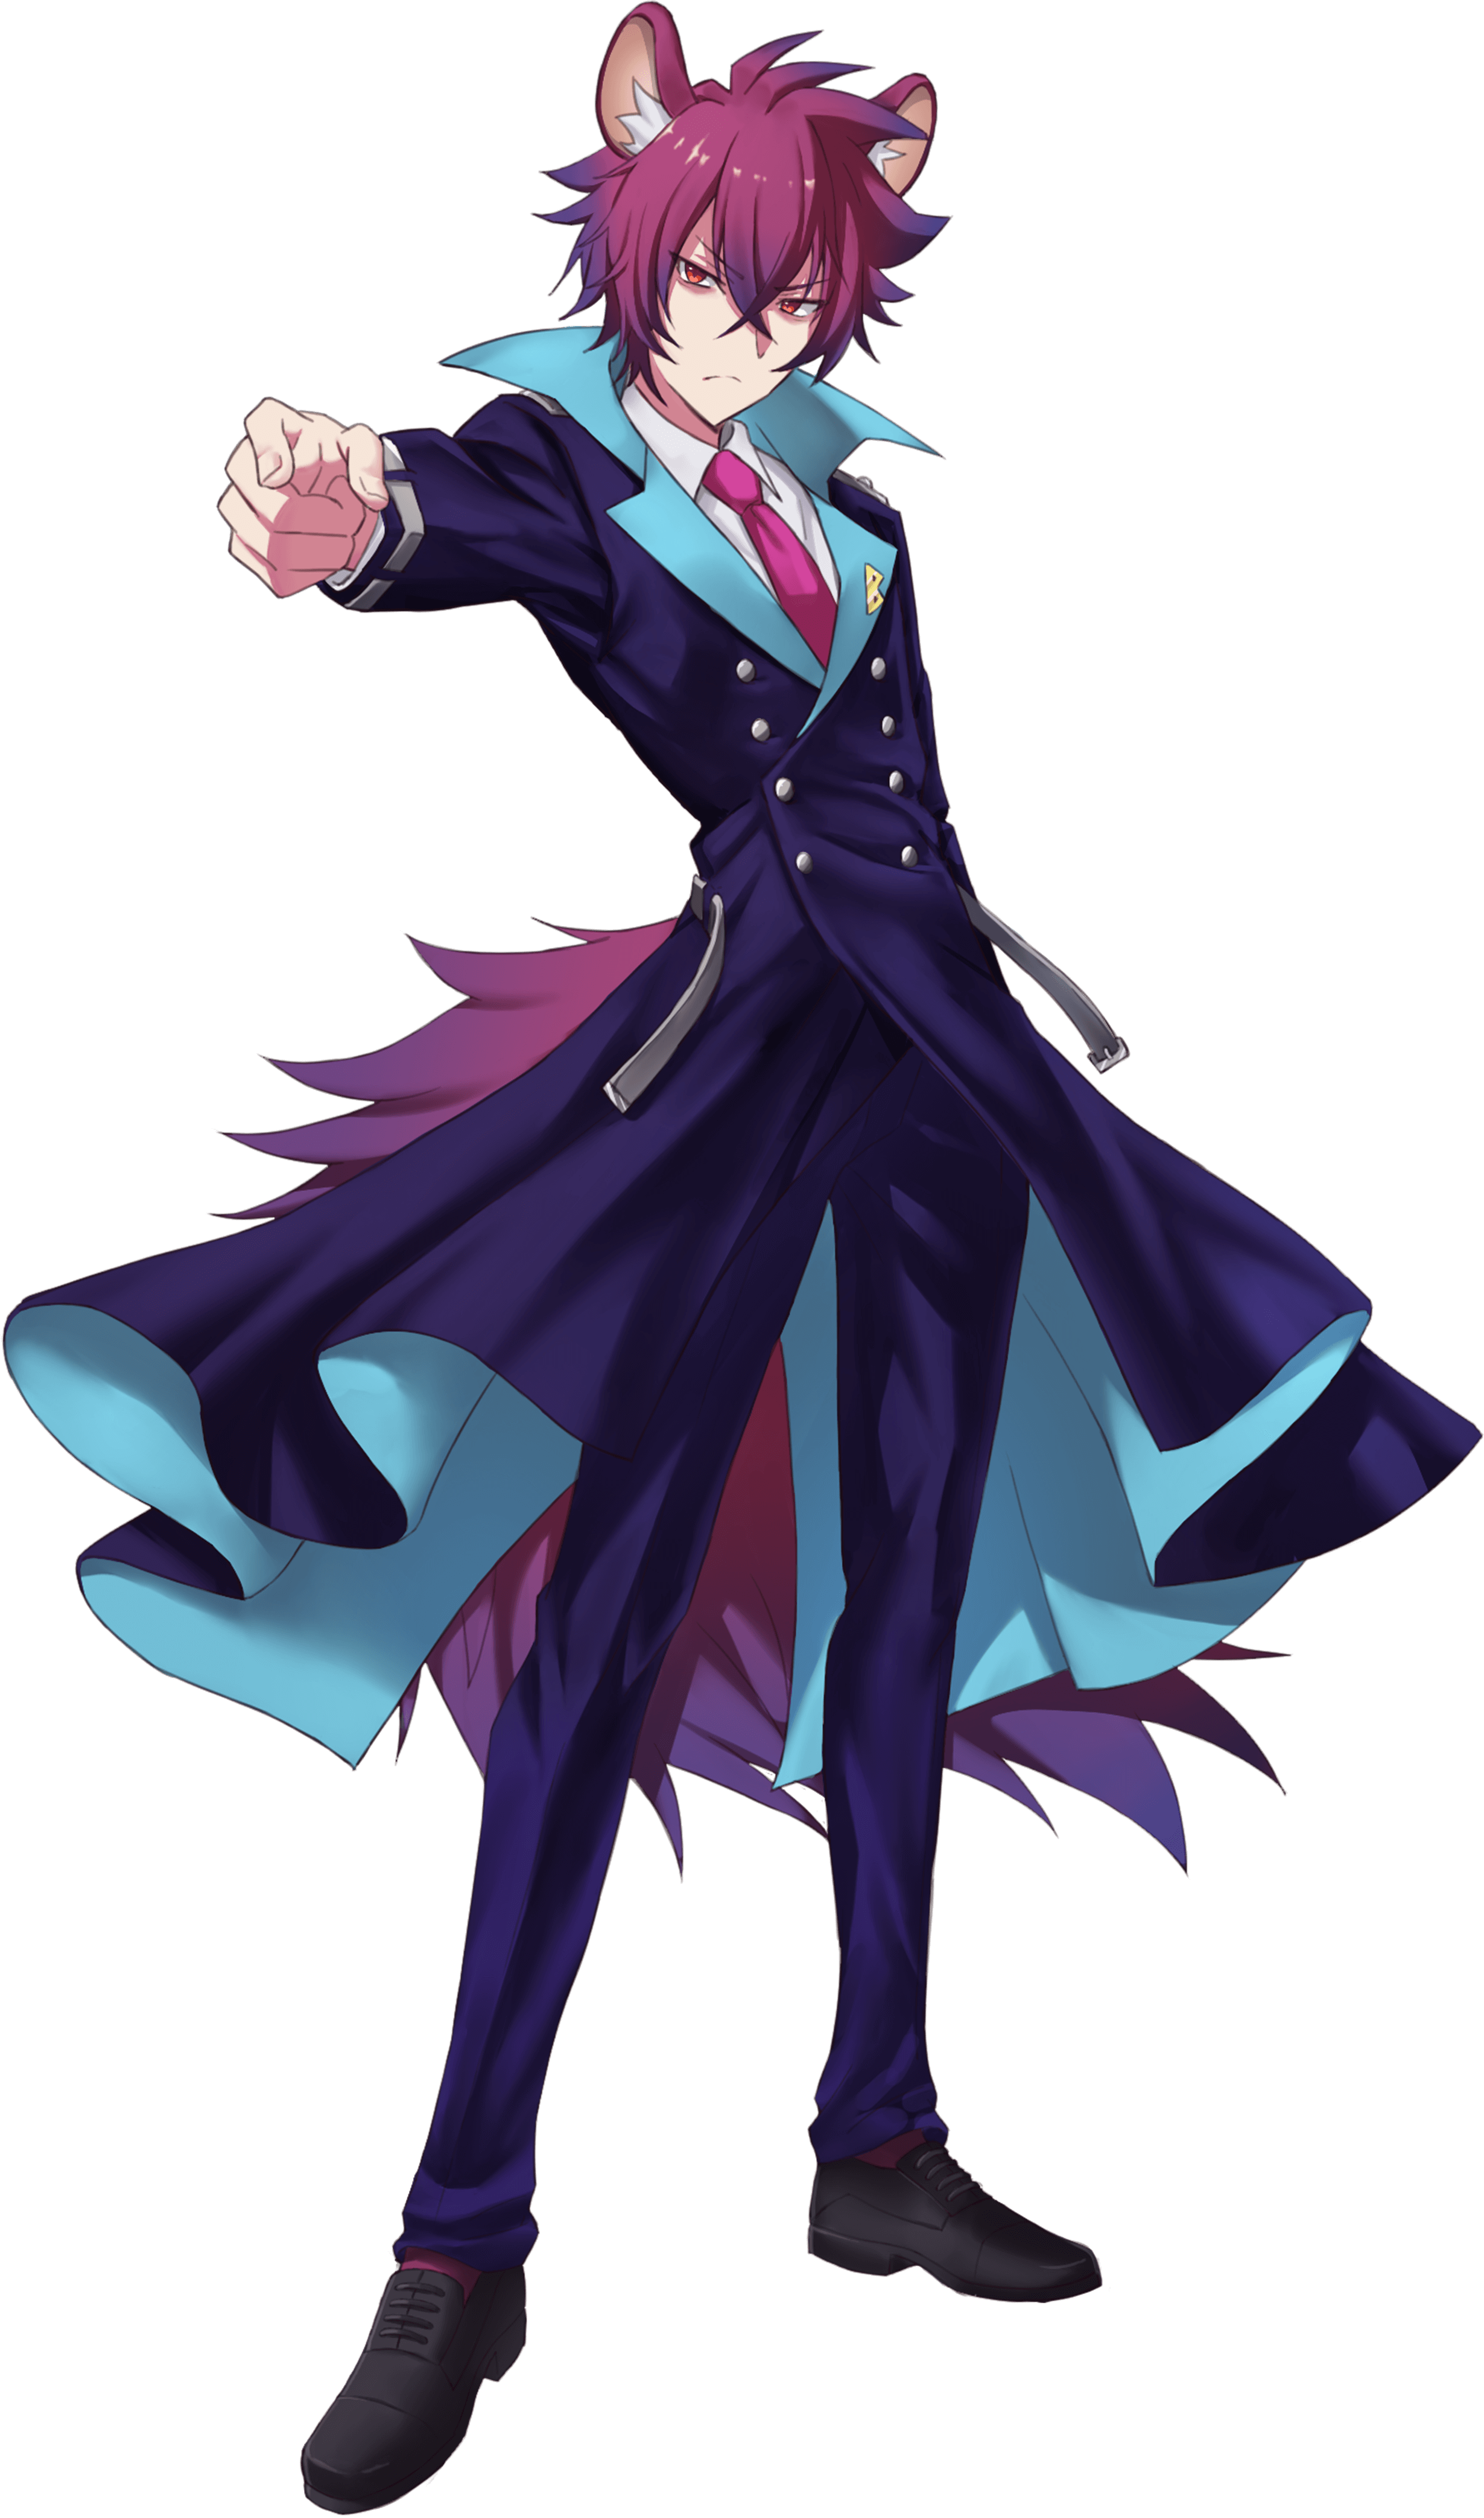 SB69F ☆ Wiki Updates!! @ bsky on X: Translations for Rikao's This Simply  Proves His Innocence Desu character episodes have been added to the wiki.  You can check them out here desu!